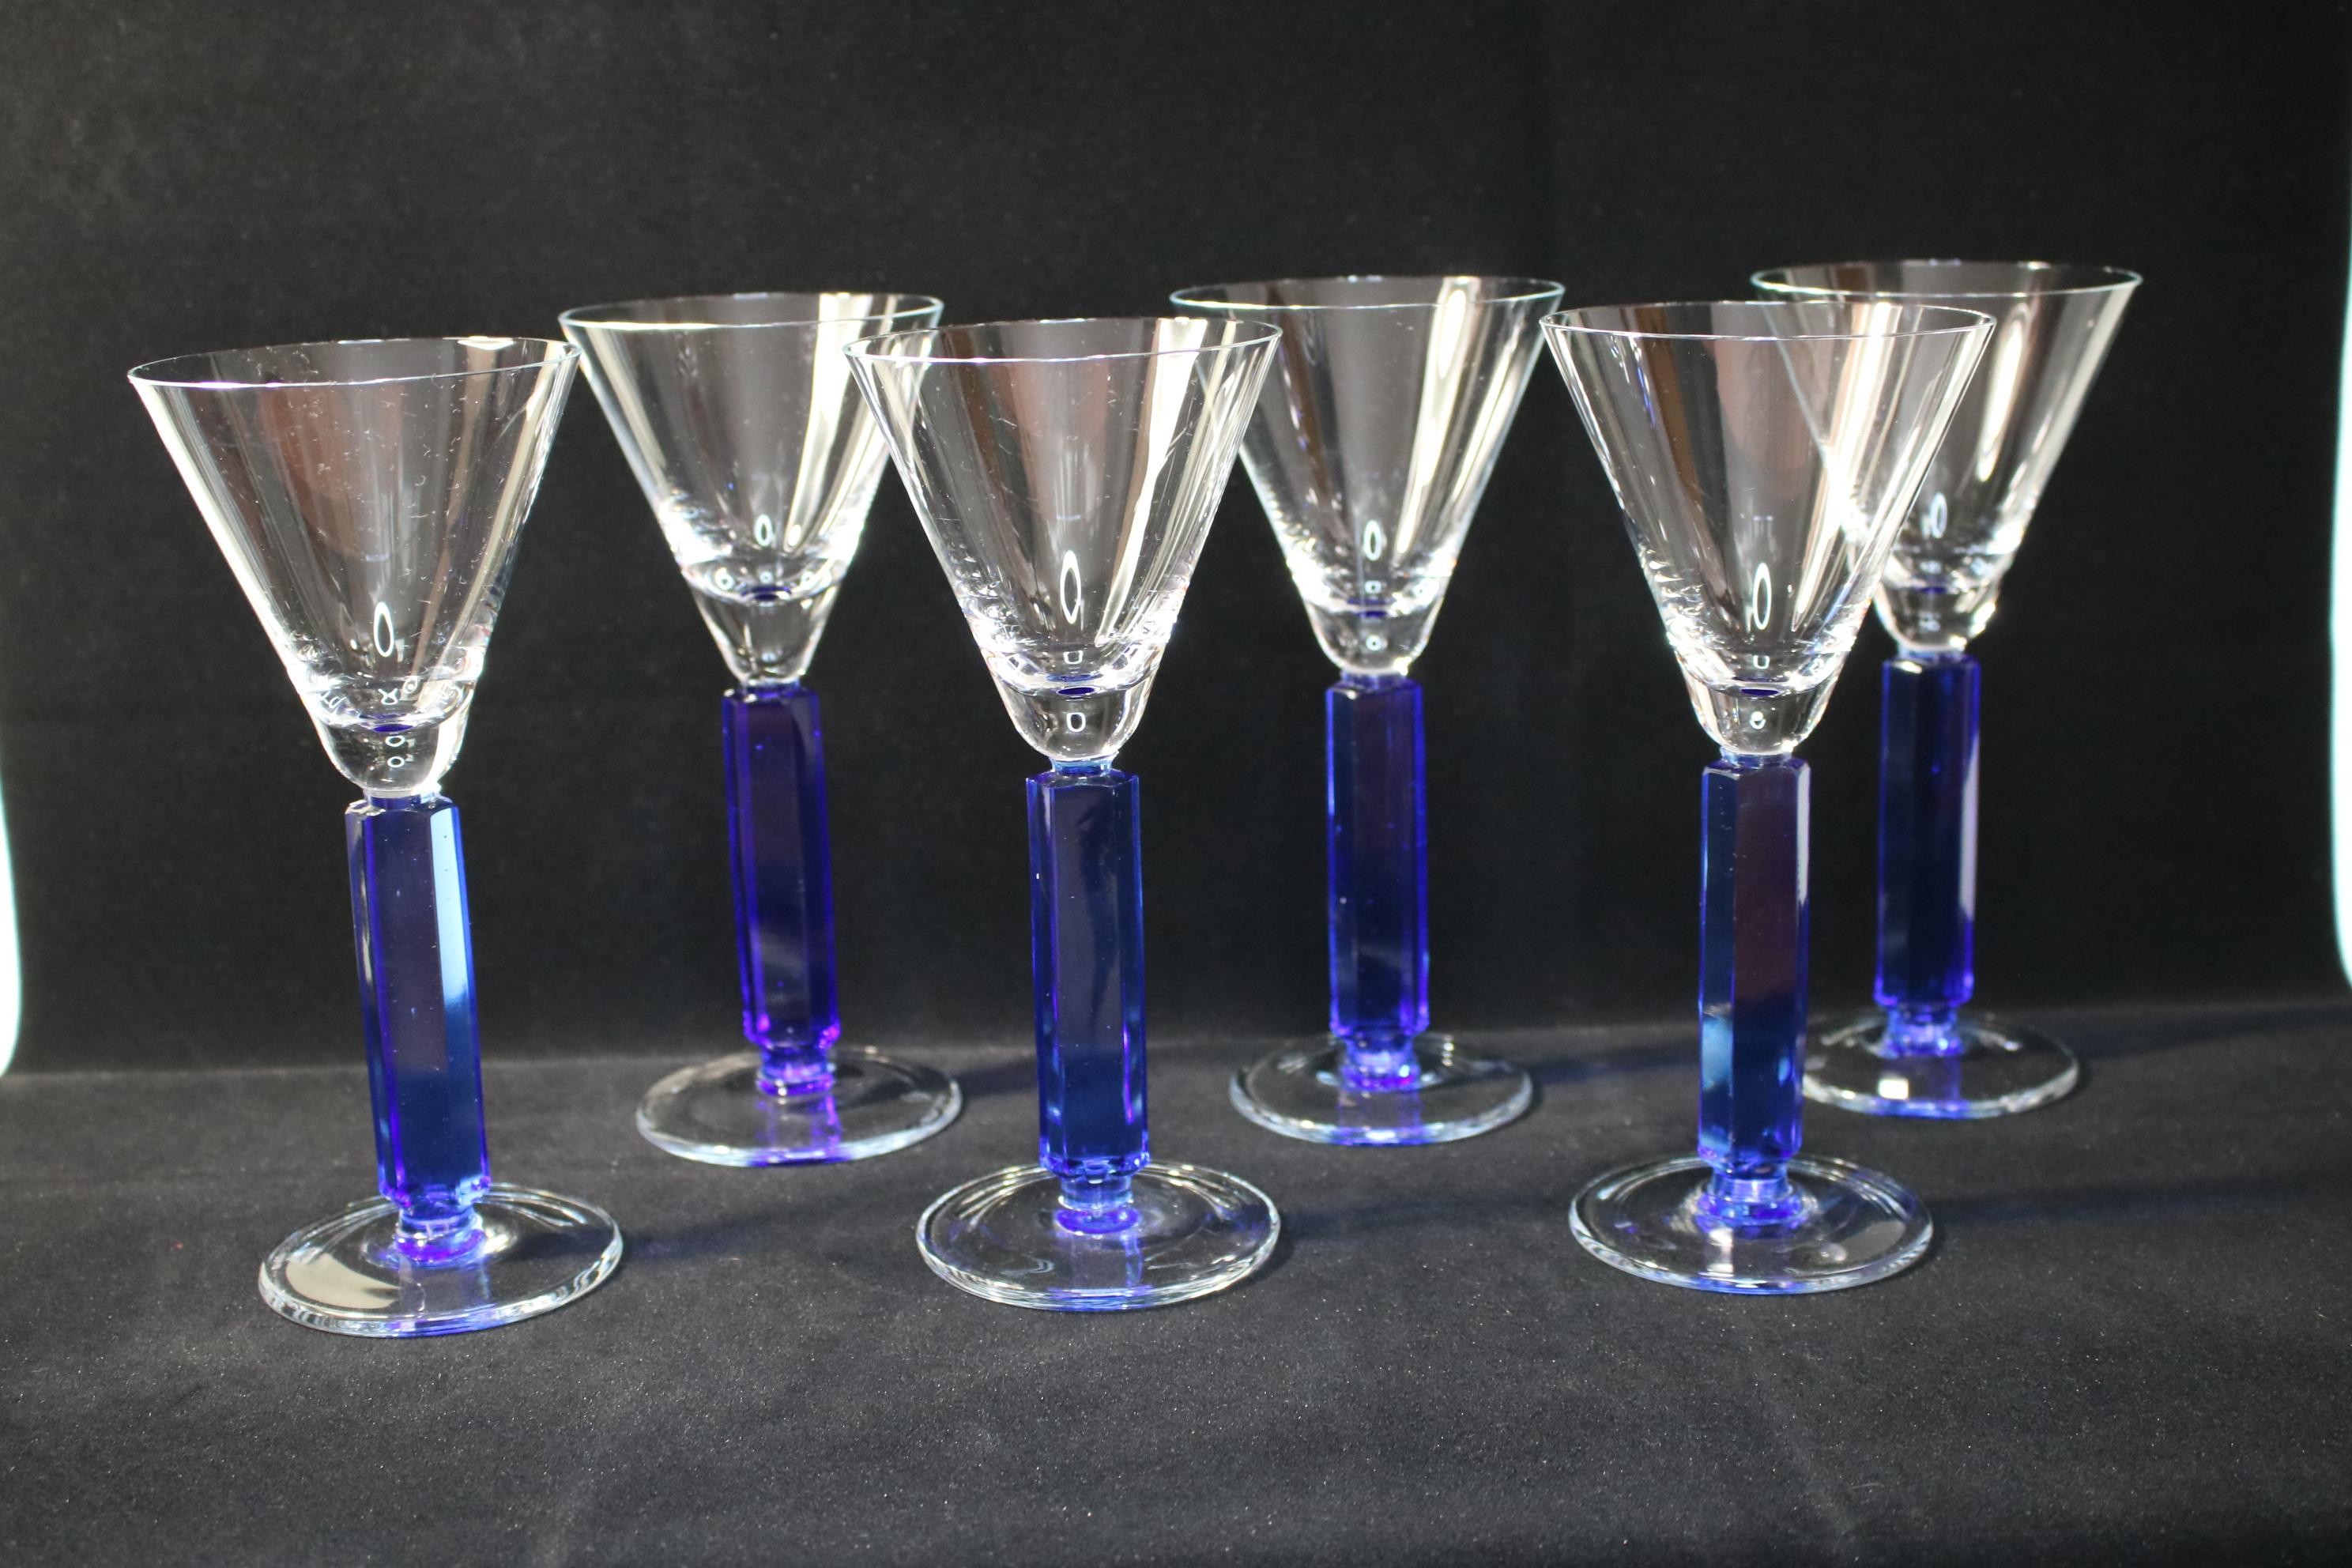 A beautiful and one of a kind set of 6 wine glasses. These were a part of a prototype production run, we were able to save these 6 pieces as the rest was destroyed. The material is sodium potassium glass.